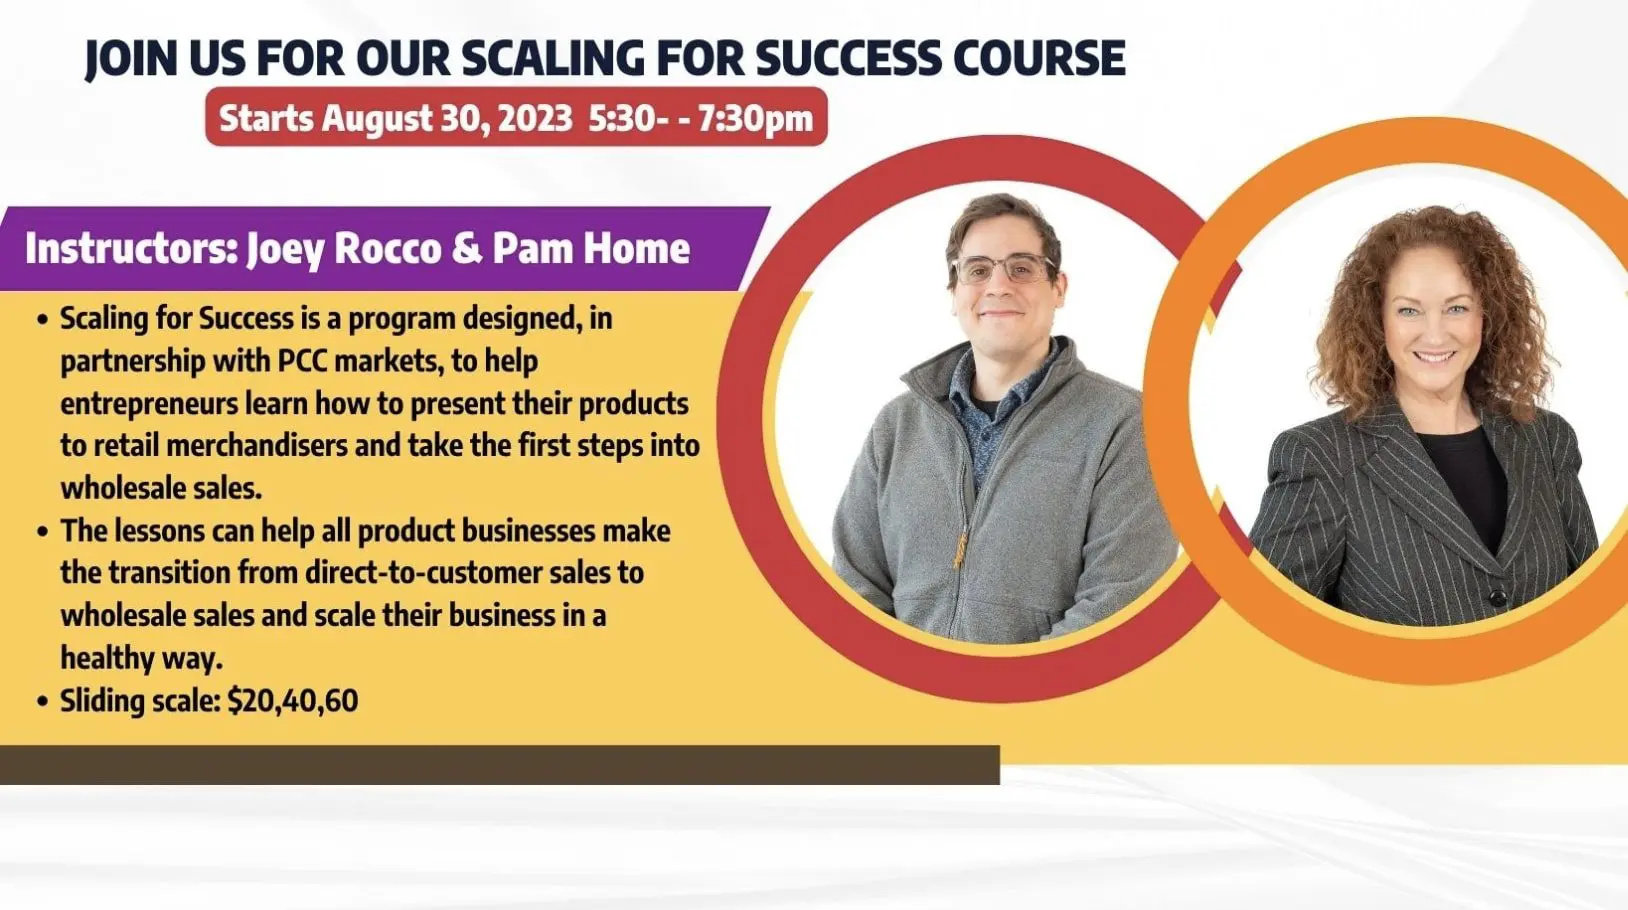 Scaling for Success